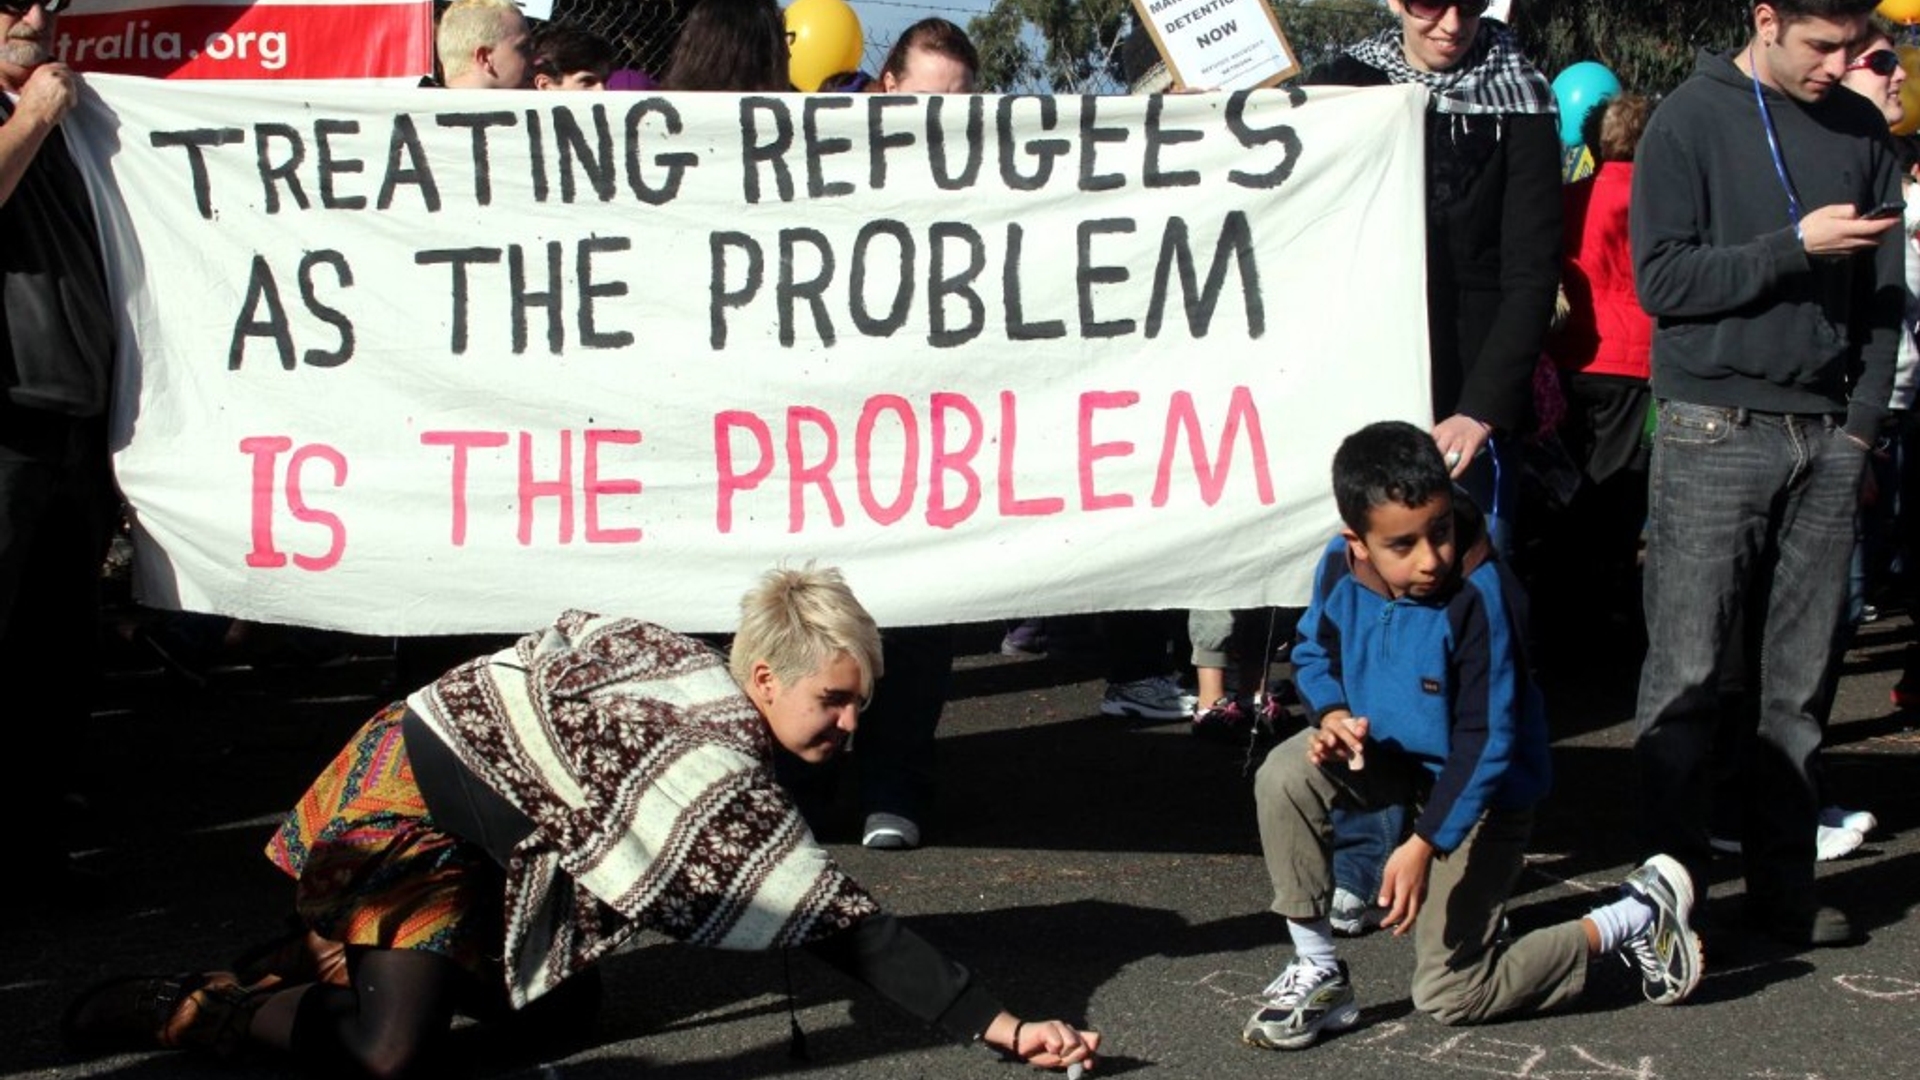 Refugee Rights Protest at Broadmeadows, Melbourne